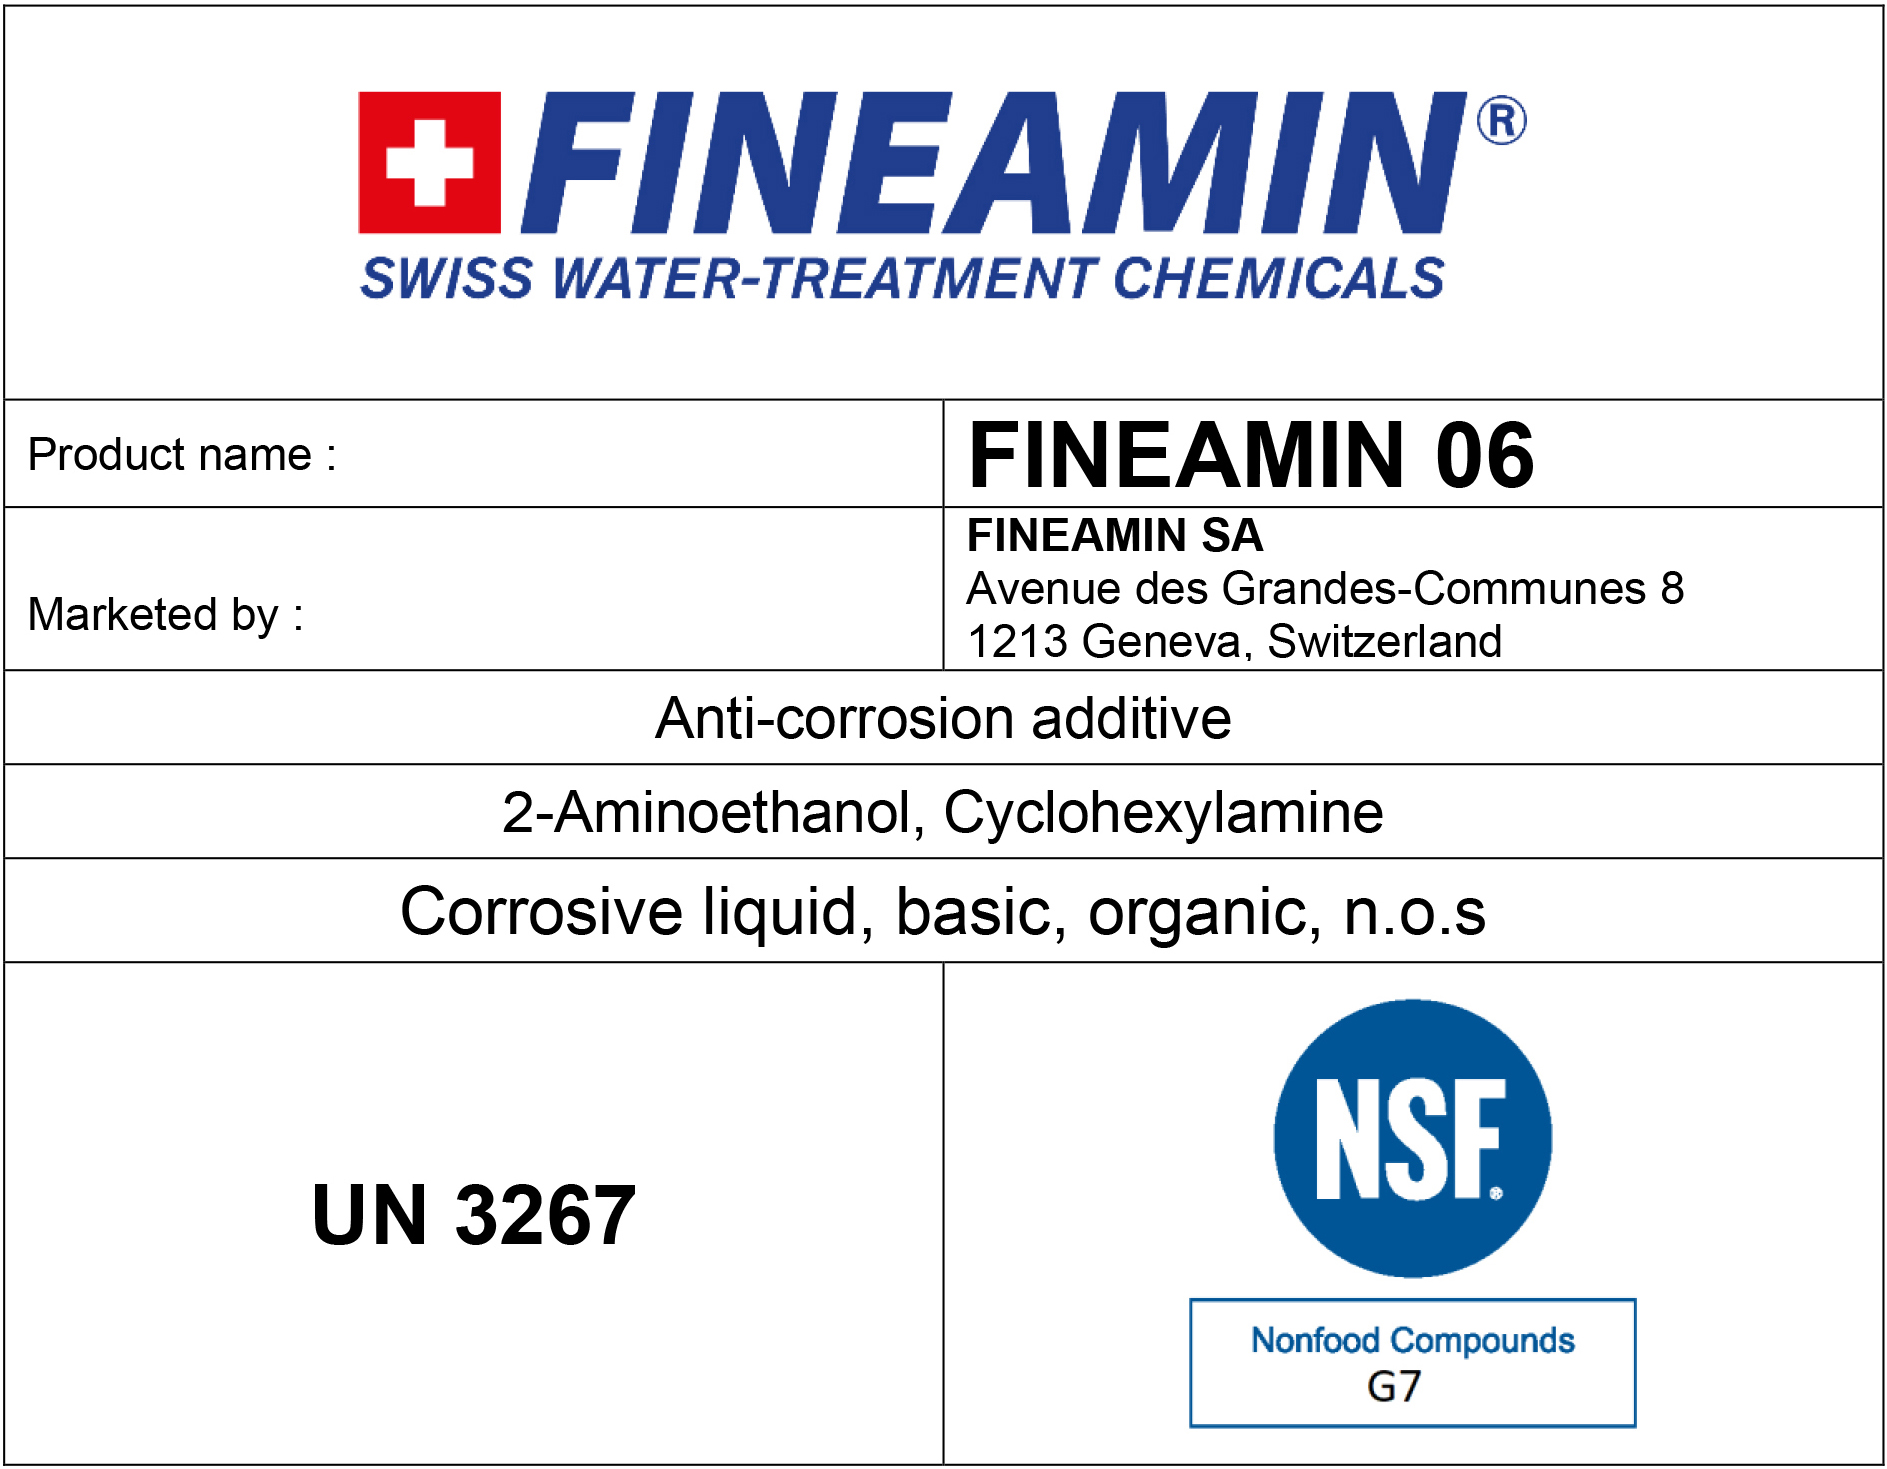 Film forming amines treatment